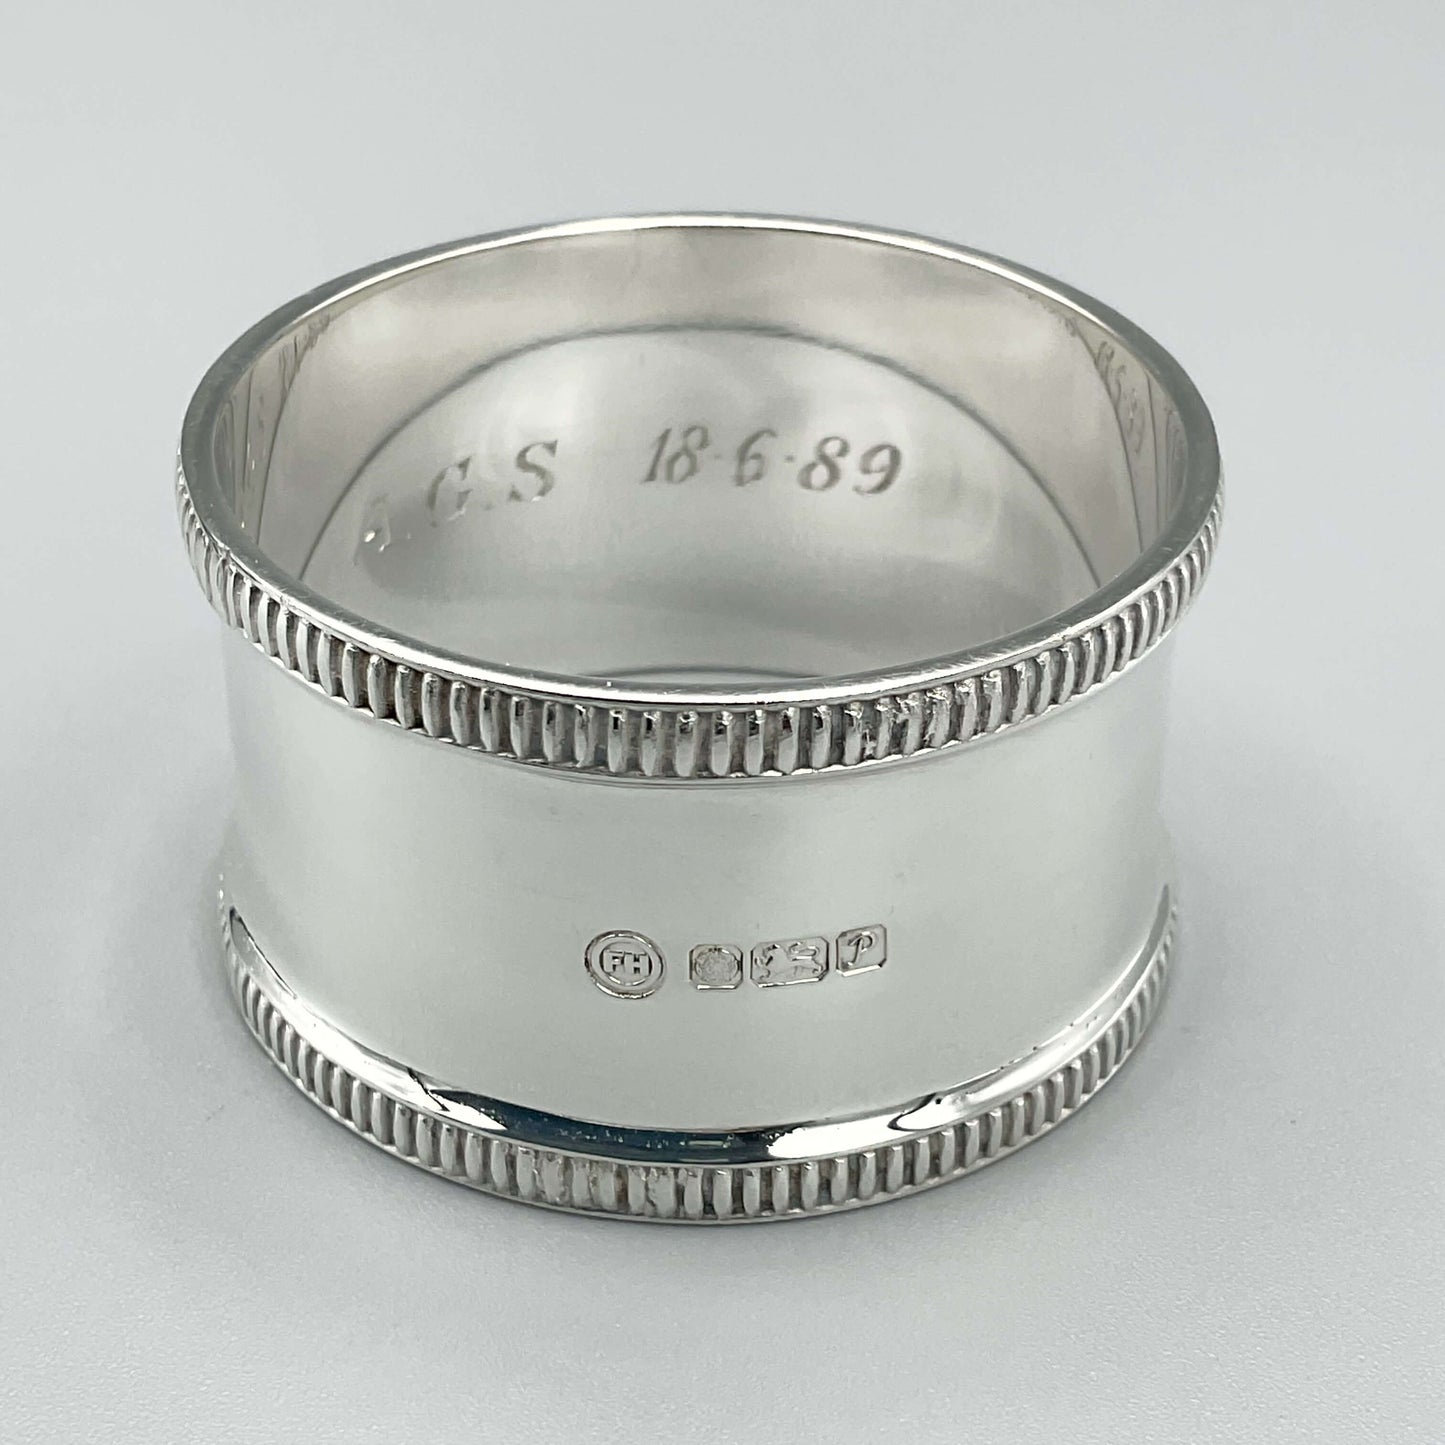 Shiny silver napkin ring showing the hallmarks and internal engraving 